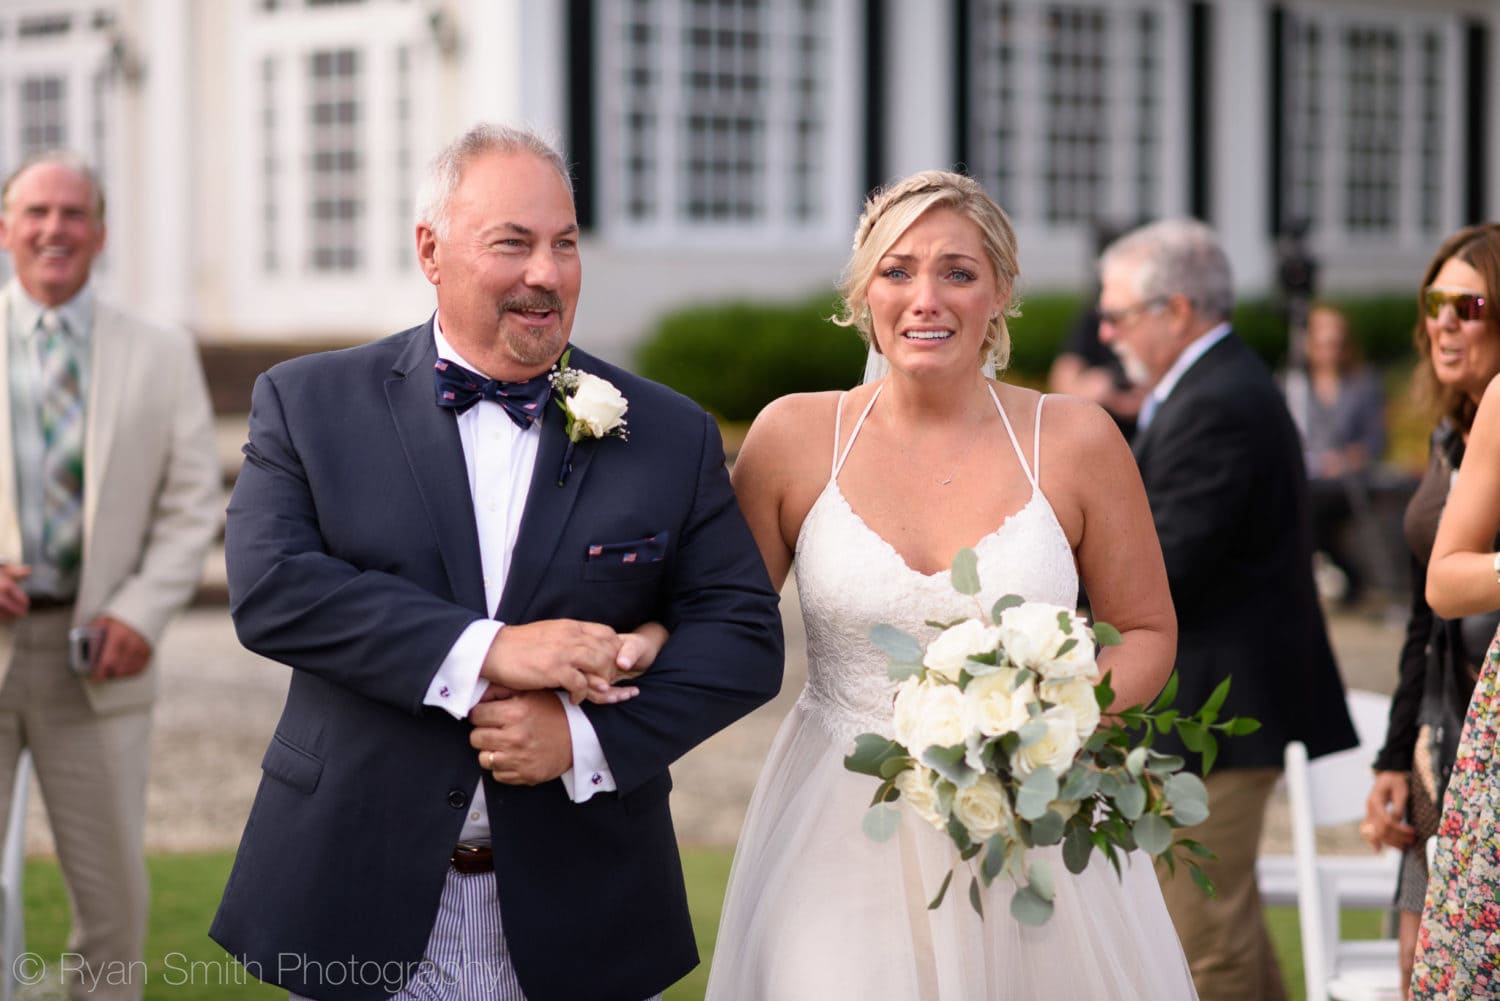 Emotional bride seeing groom for the first time - Pawleys Plantation